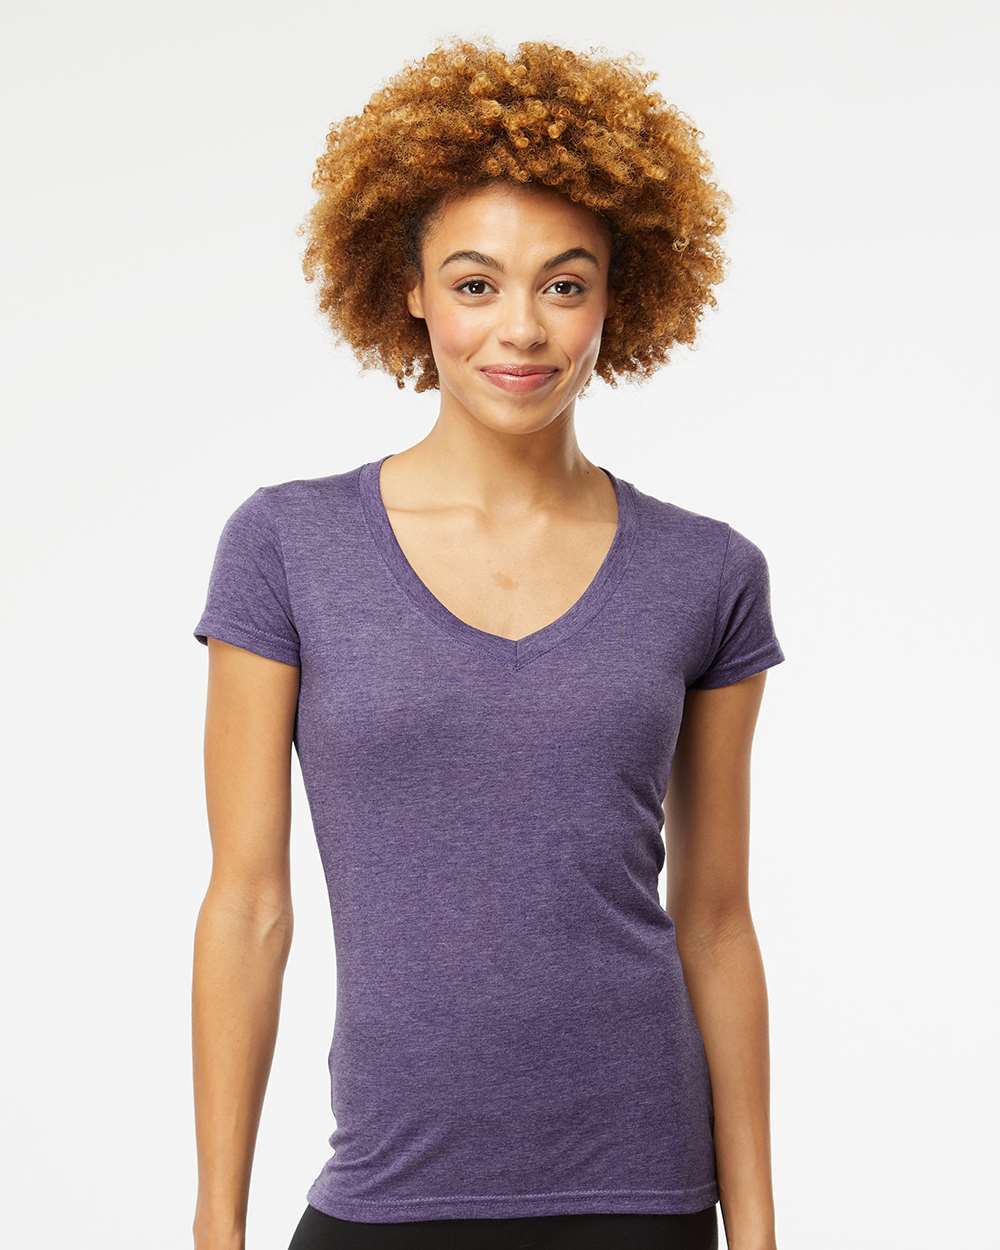 M&O Women's Deluxe Blend V-Neck T-Shirt 3542 #colormdl_Heather Purple